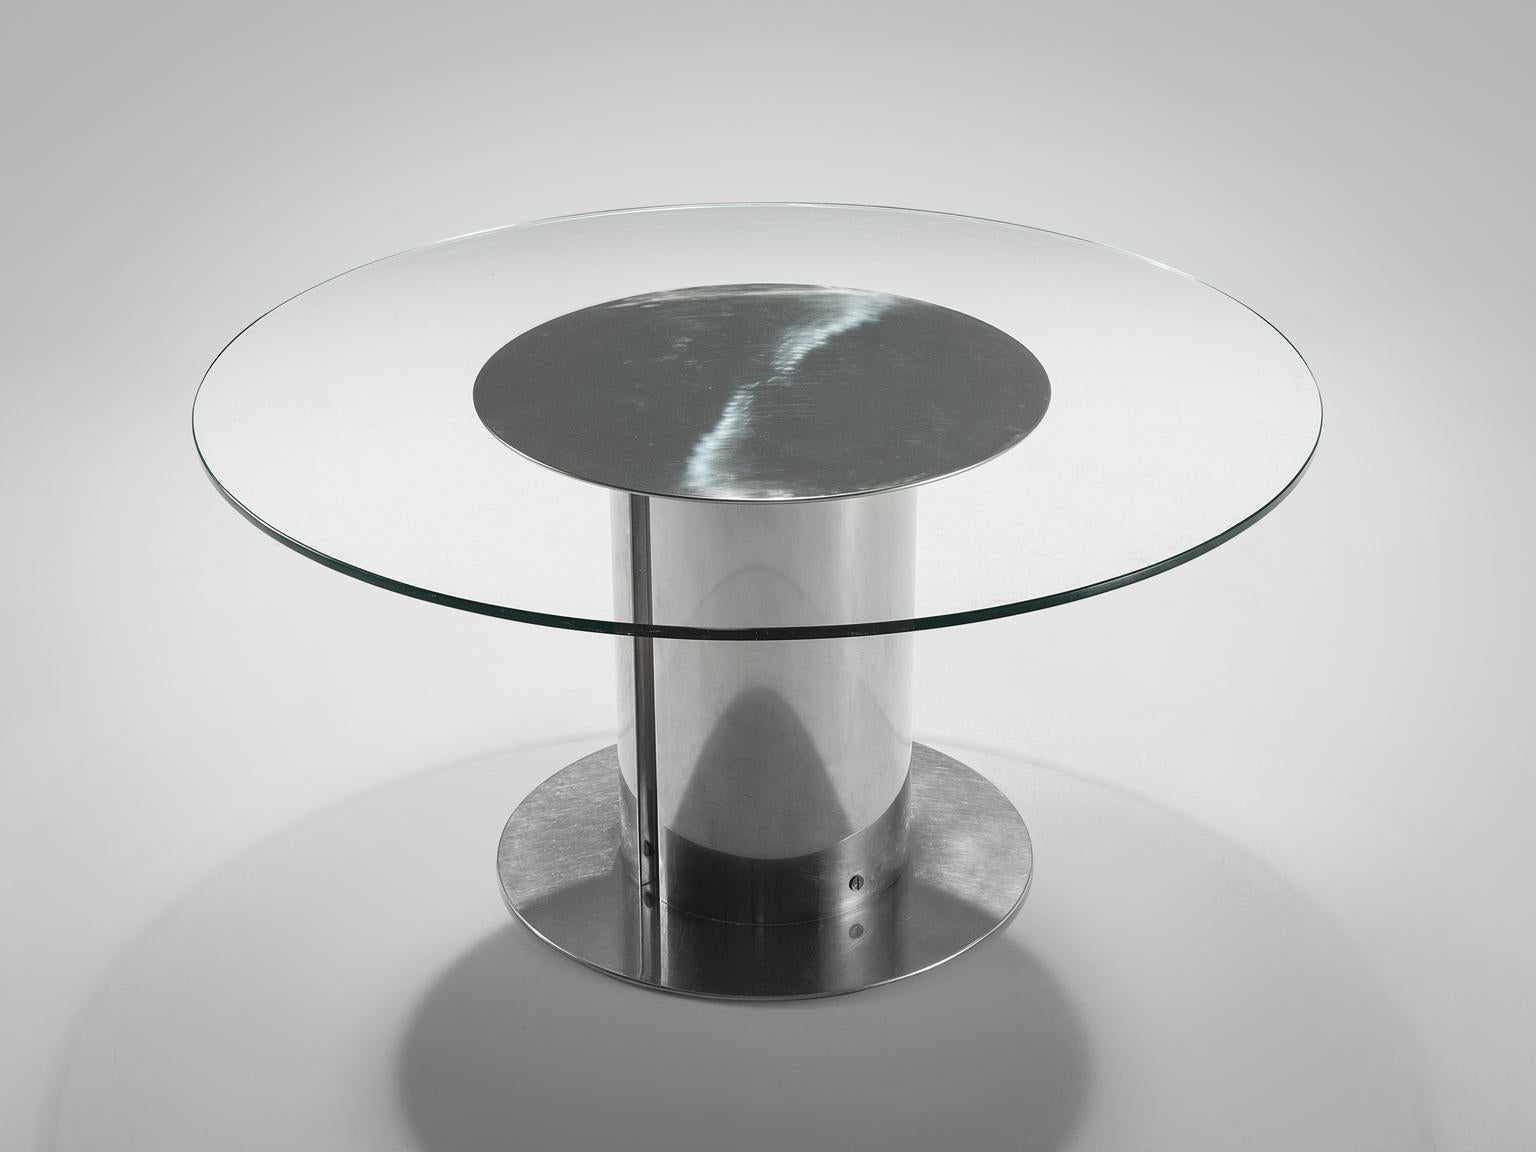 Antonia Astori for Cidue, Cidonio dining table, chromed metal, glass, Italy, ca. 1968.

This postmodern centre table with chromed industrial foot features a circular glass top and a brushed chromed metal base. The table is designed for Cidue and